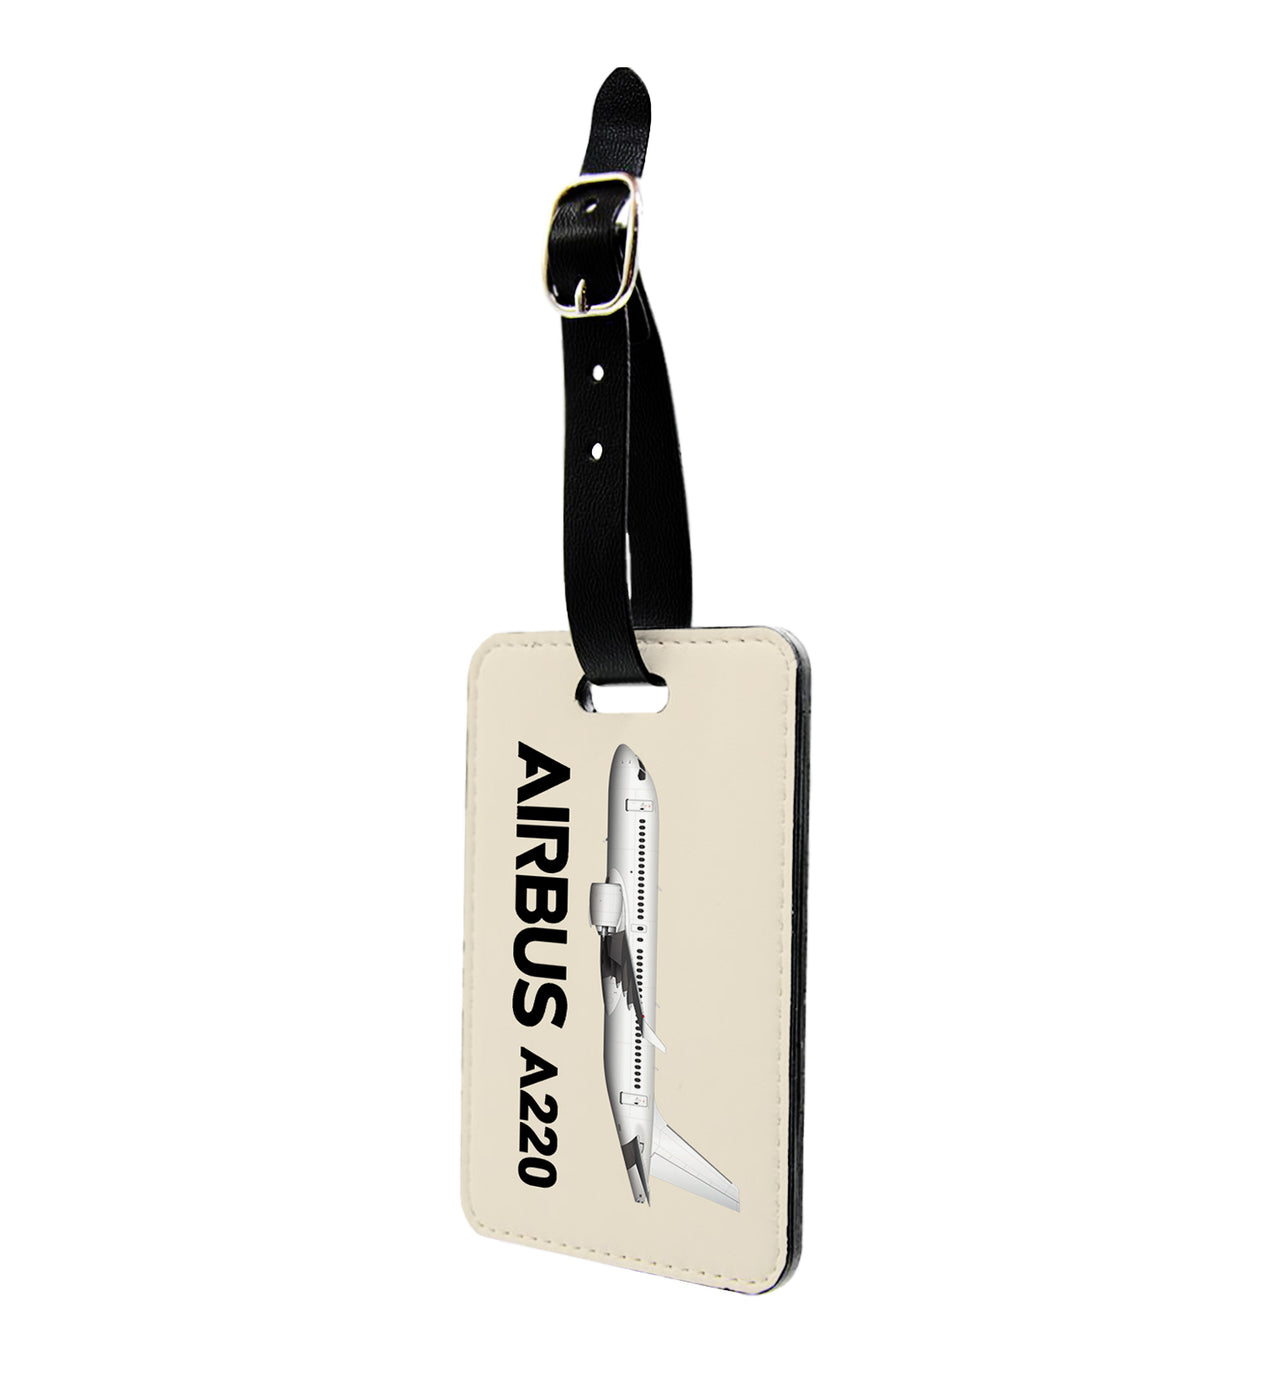 The Airbus A220 Designed Luggage Tag